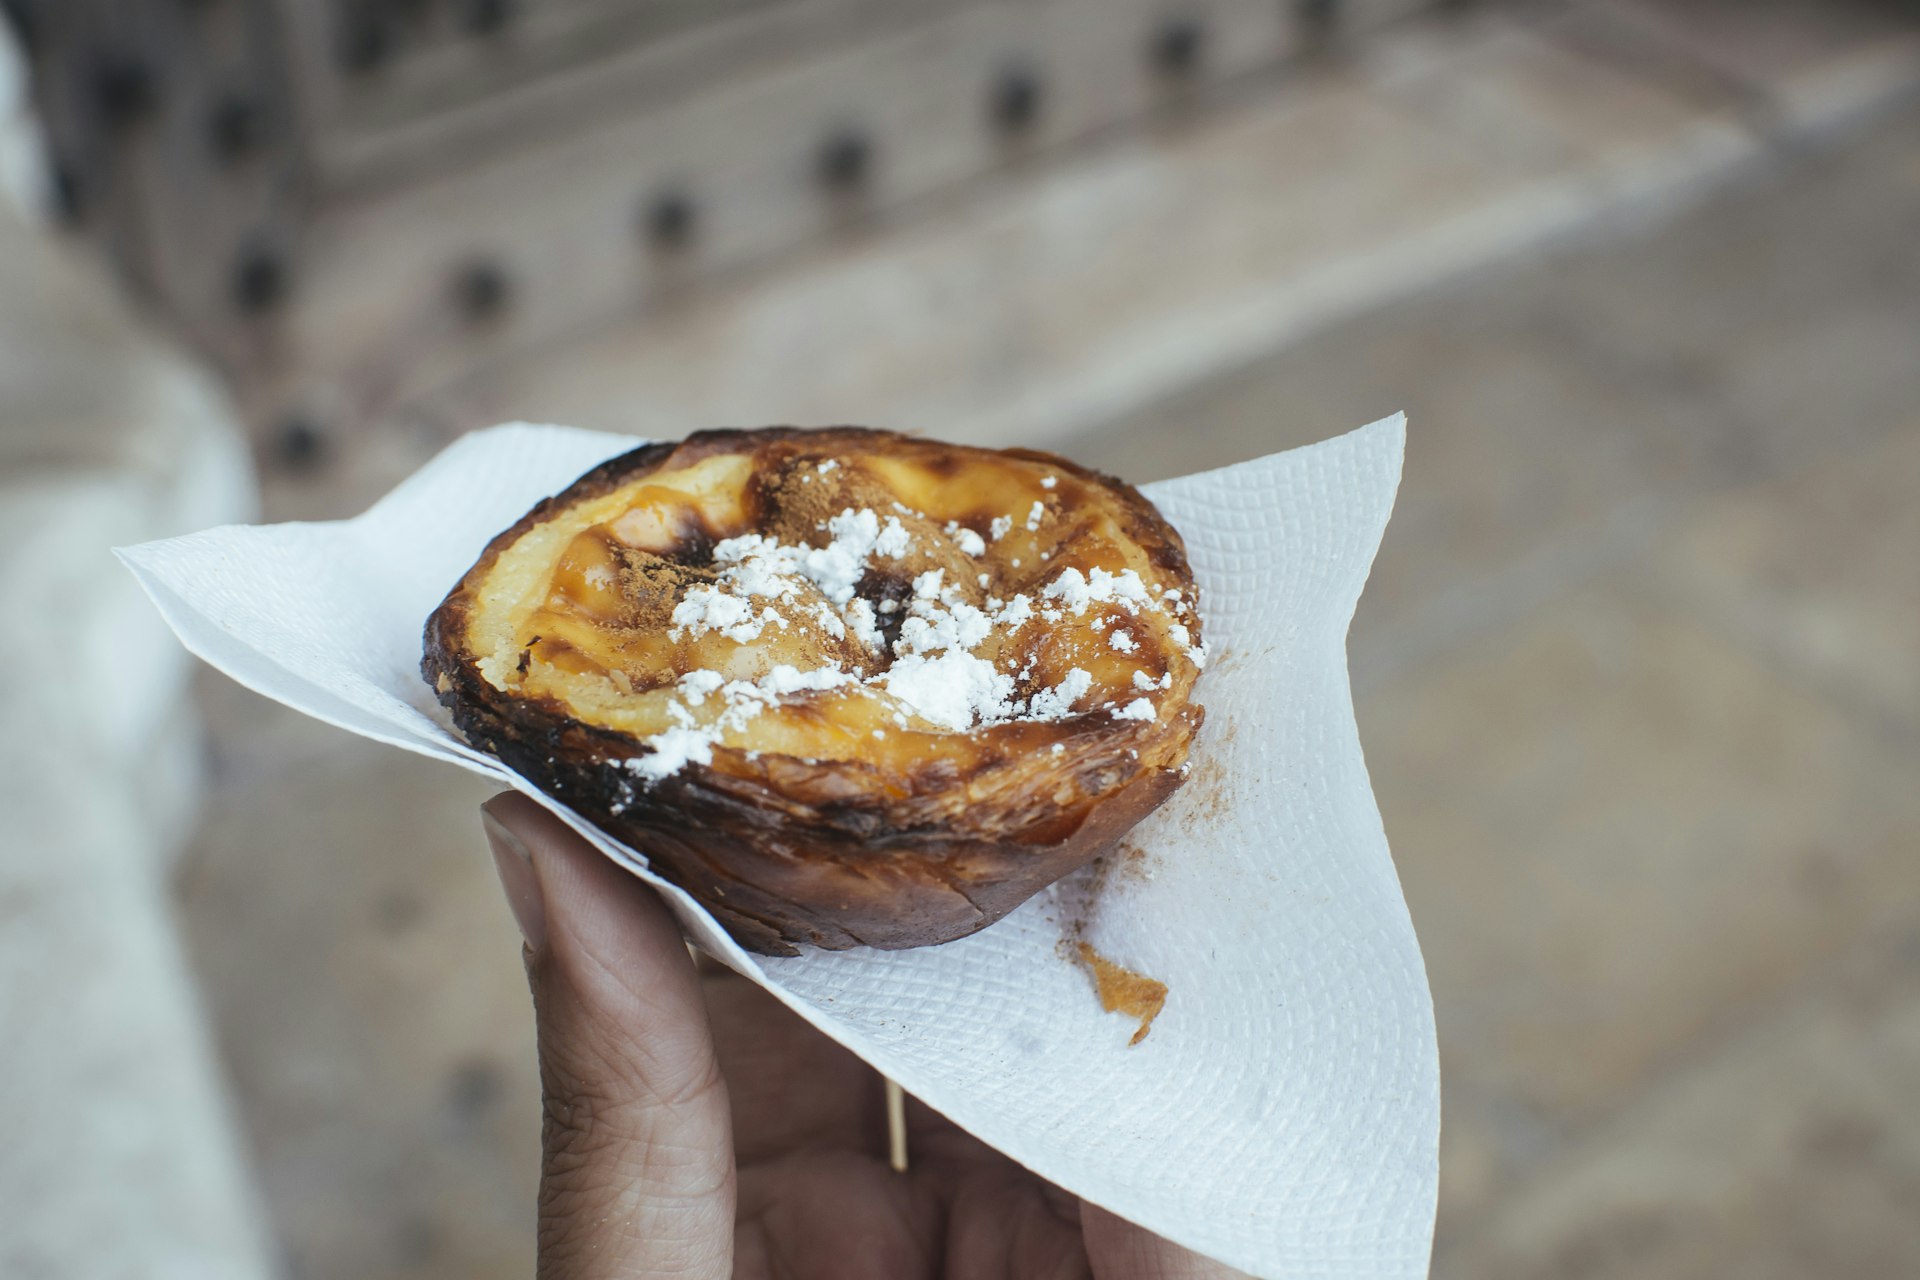 Hand holding a traditional Portuguese tart from Pasteis de Belem in Lisbon, Portugal